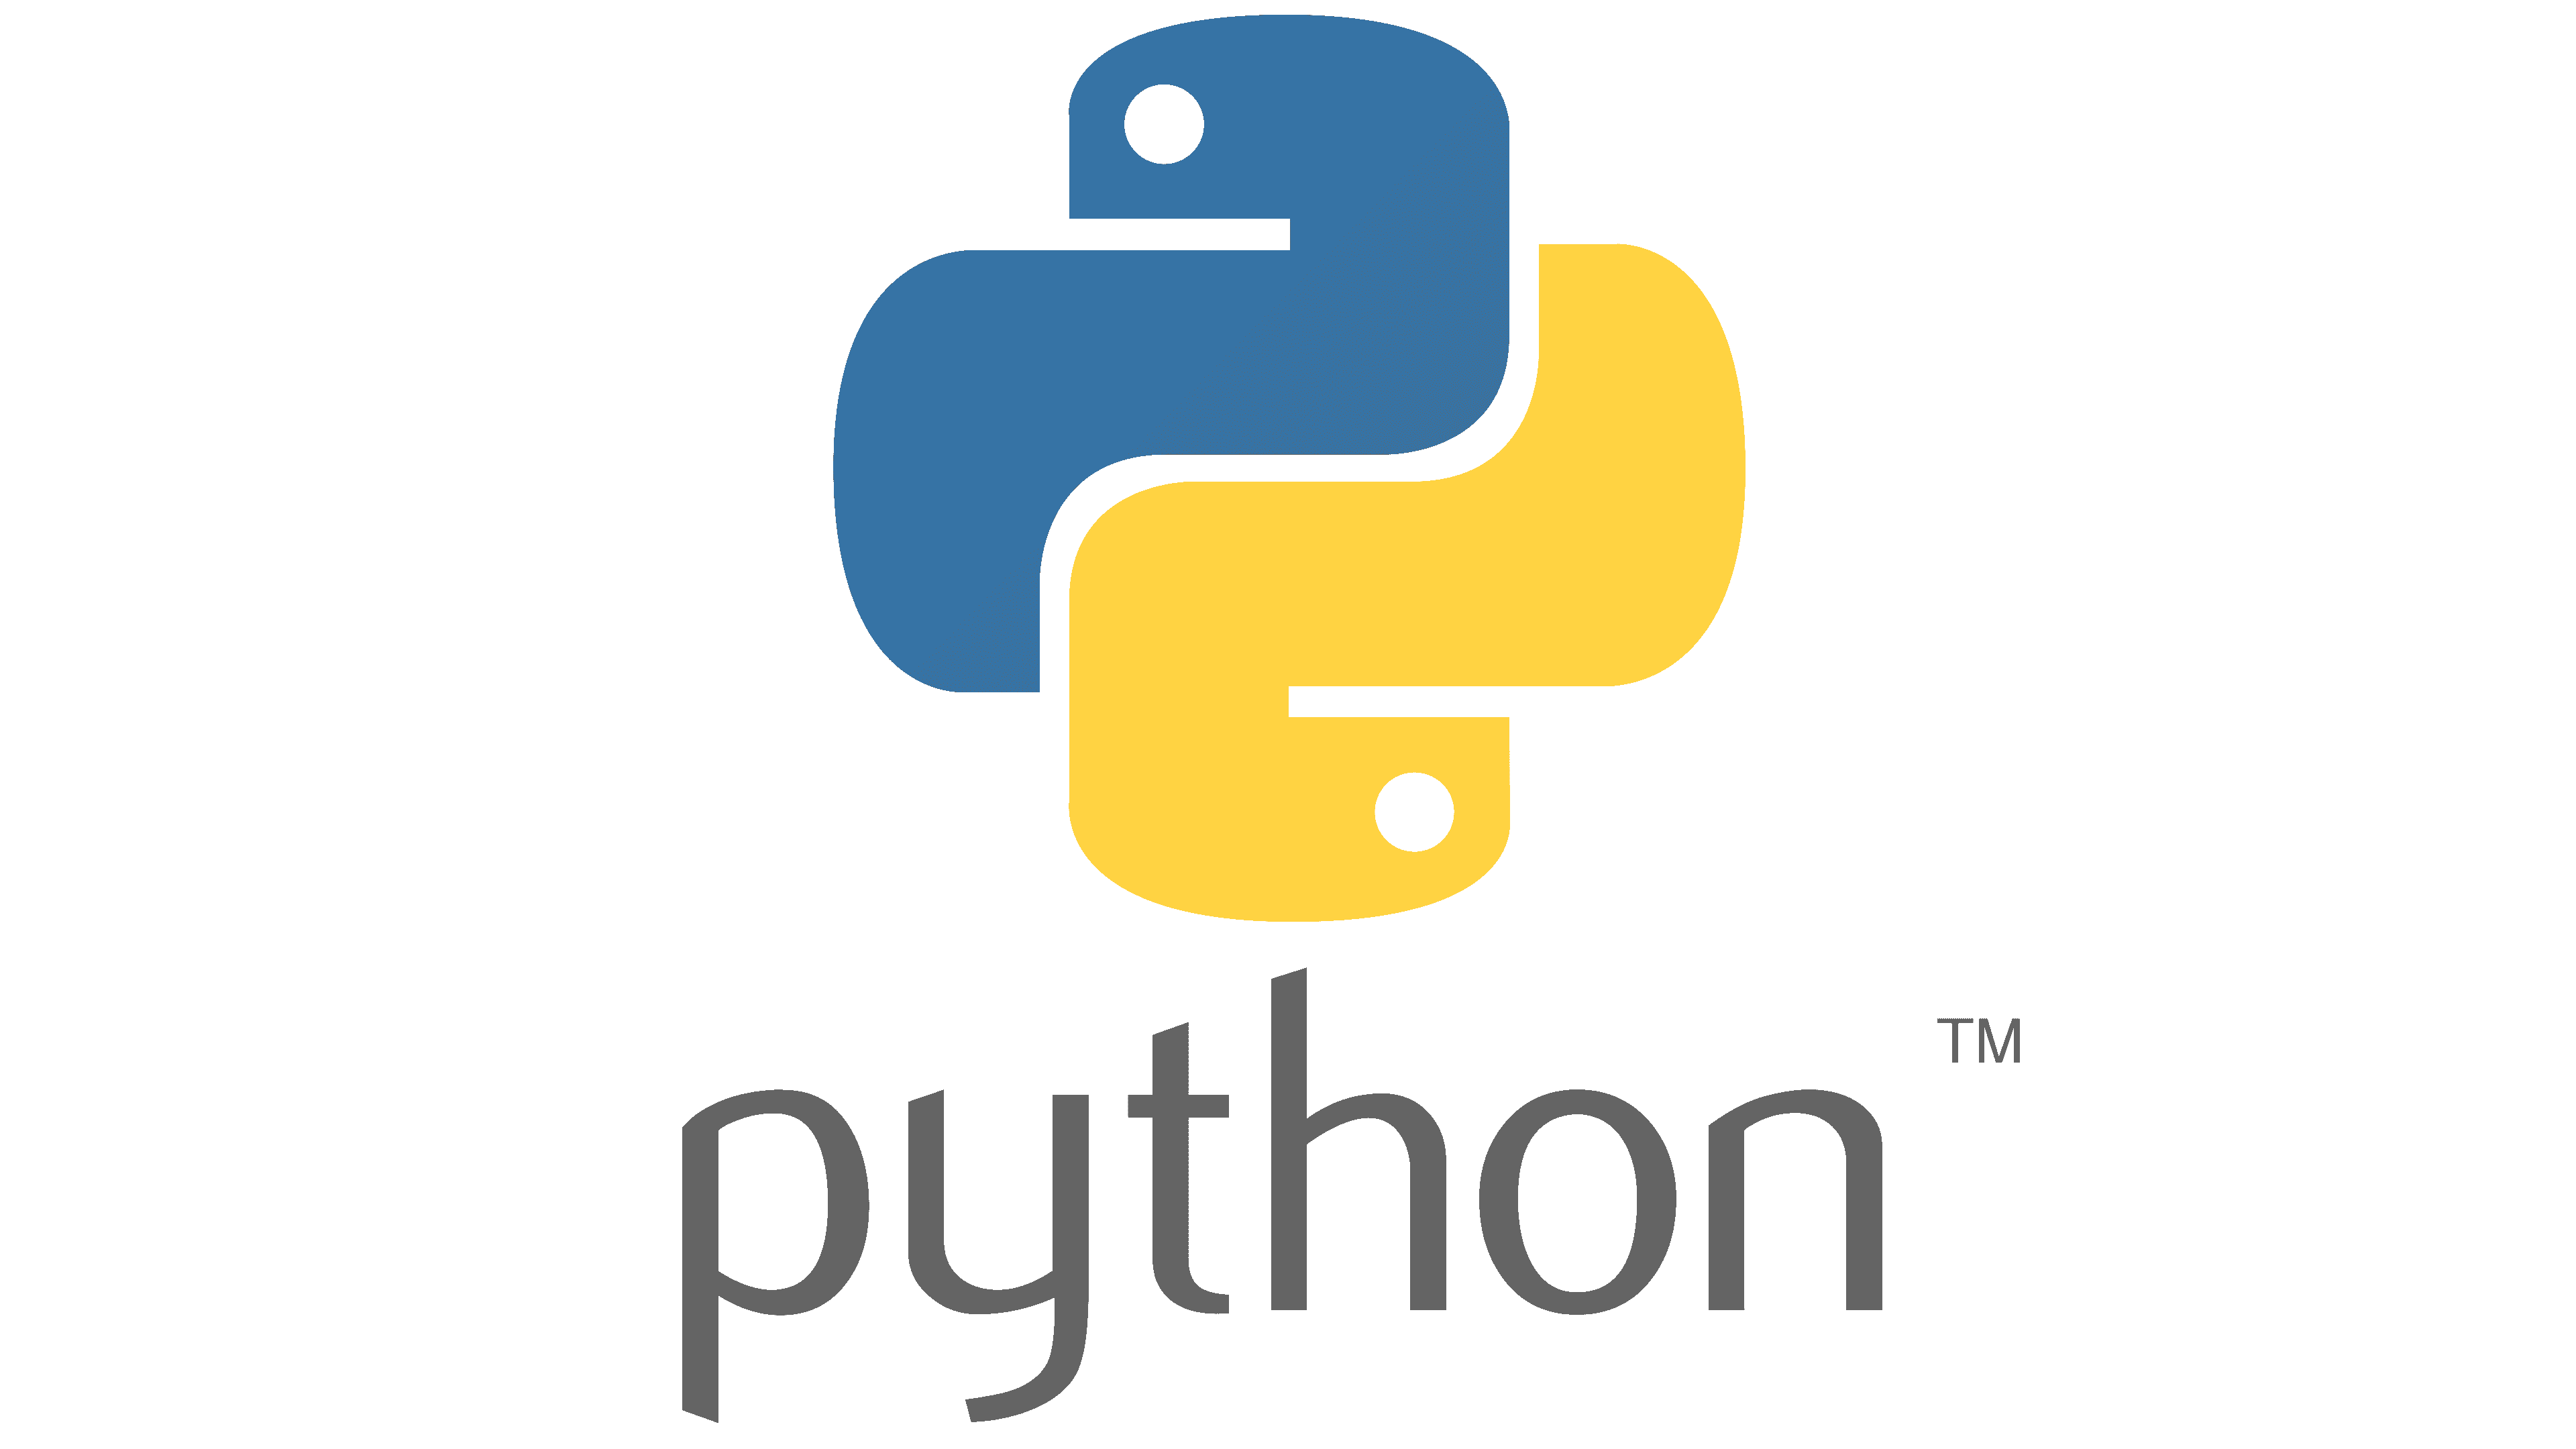 IT12A01: FUNDAMENTALS OF PYTHON PROGRAMMING (SF) (SYNCHRONOUS E-LEARNING) -  NTUC LearningHub